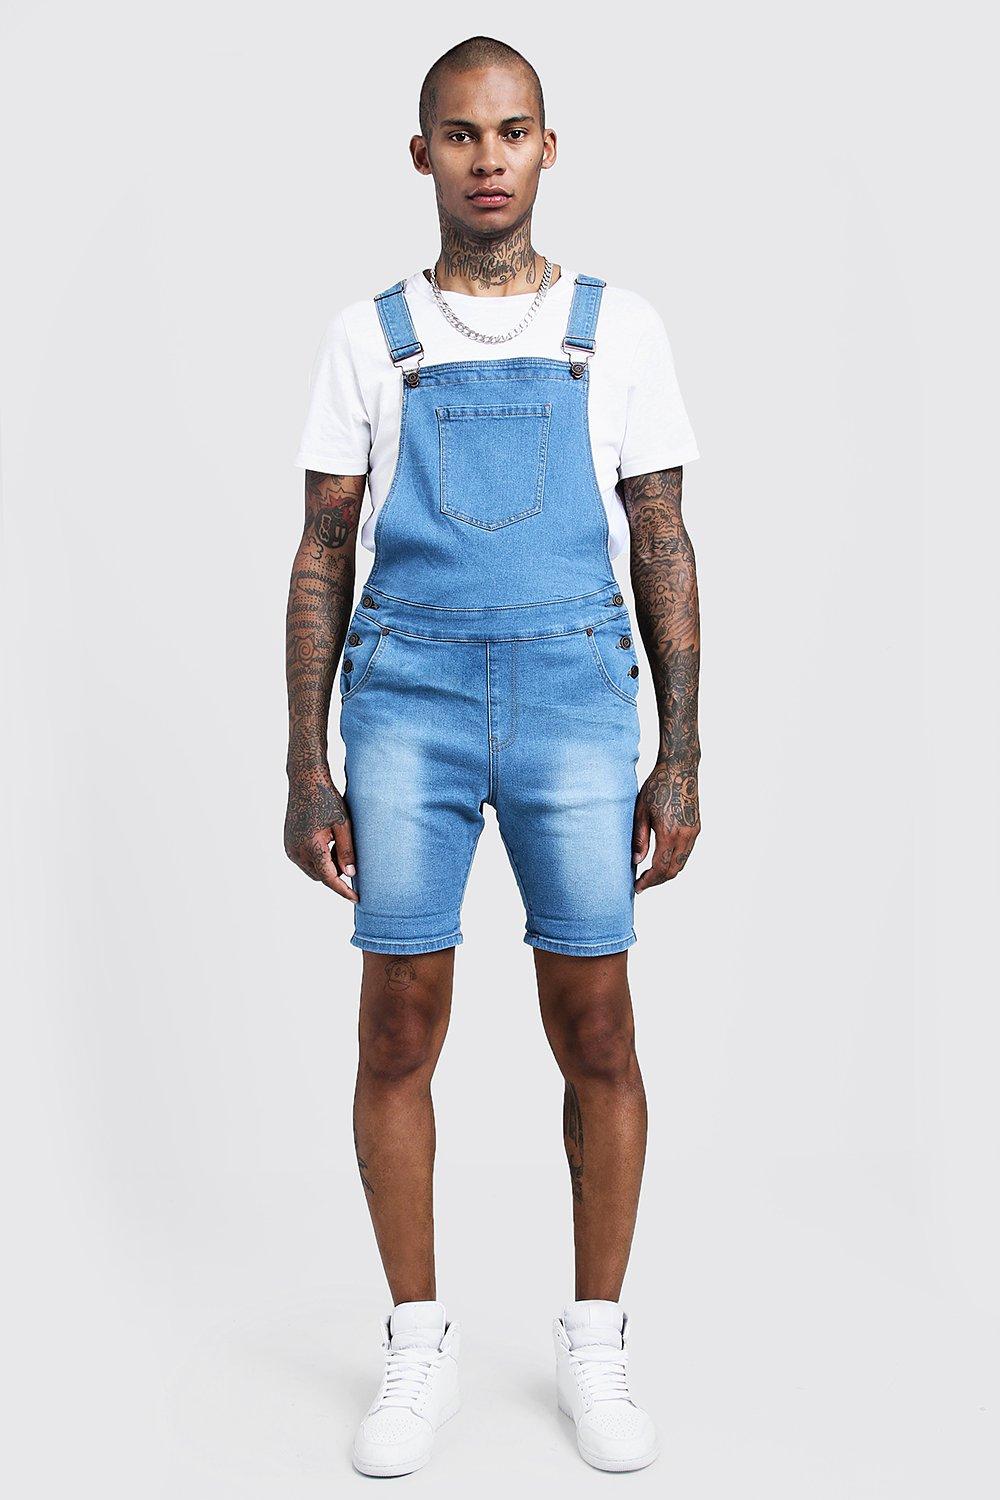 overall shorts canada